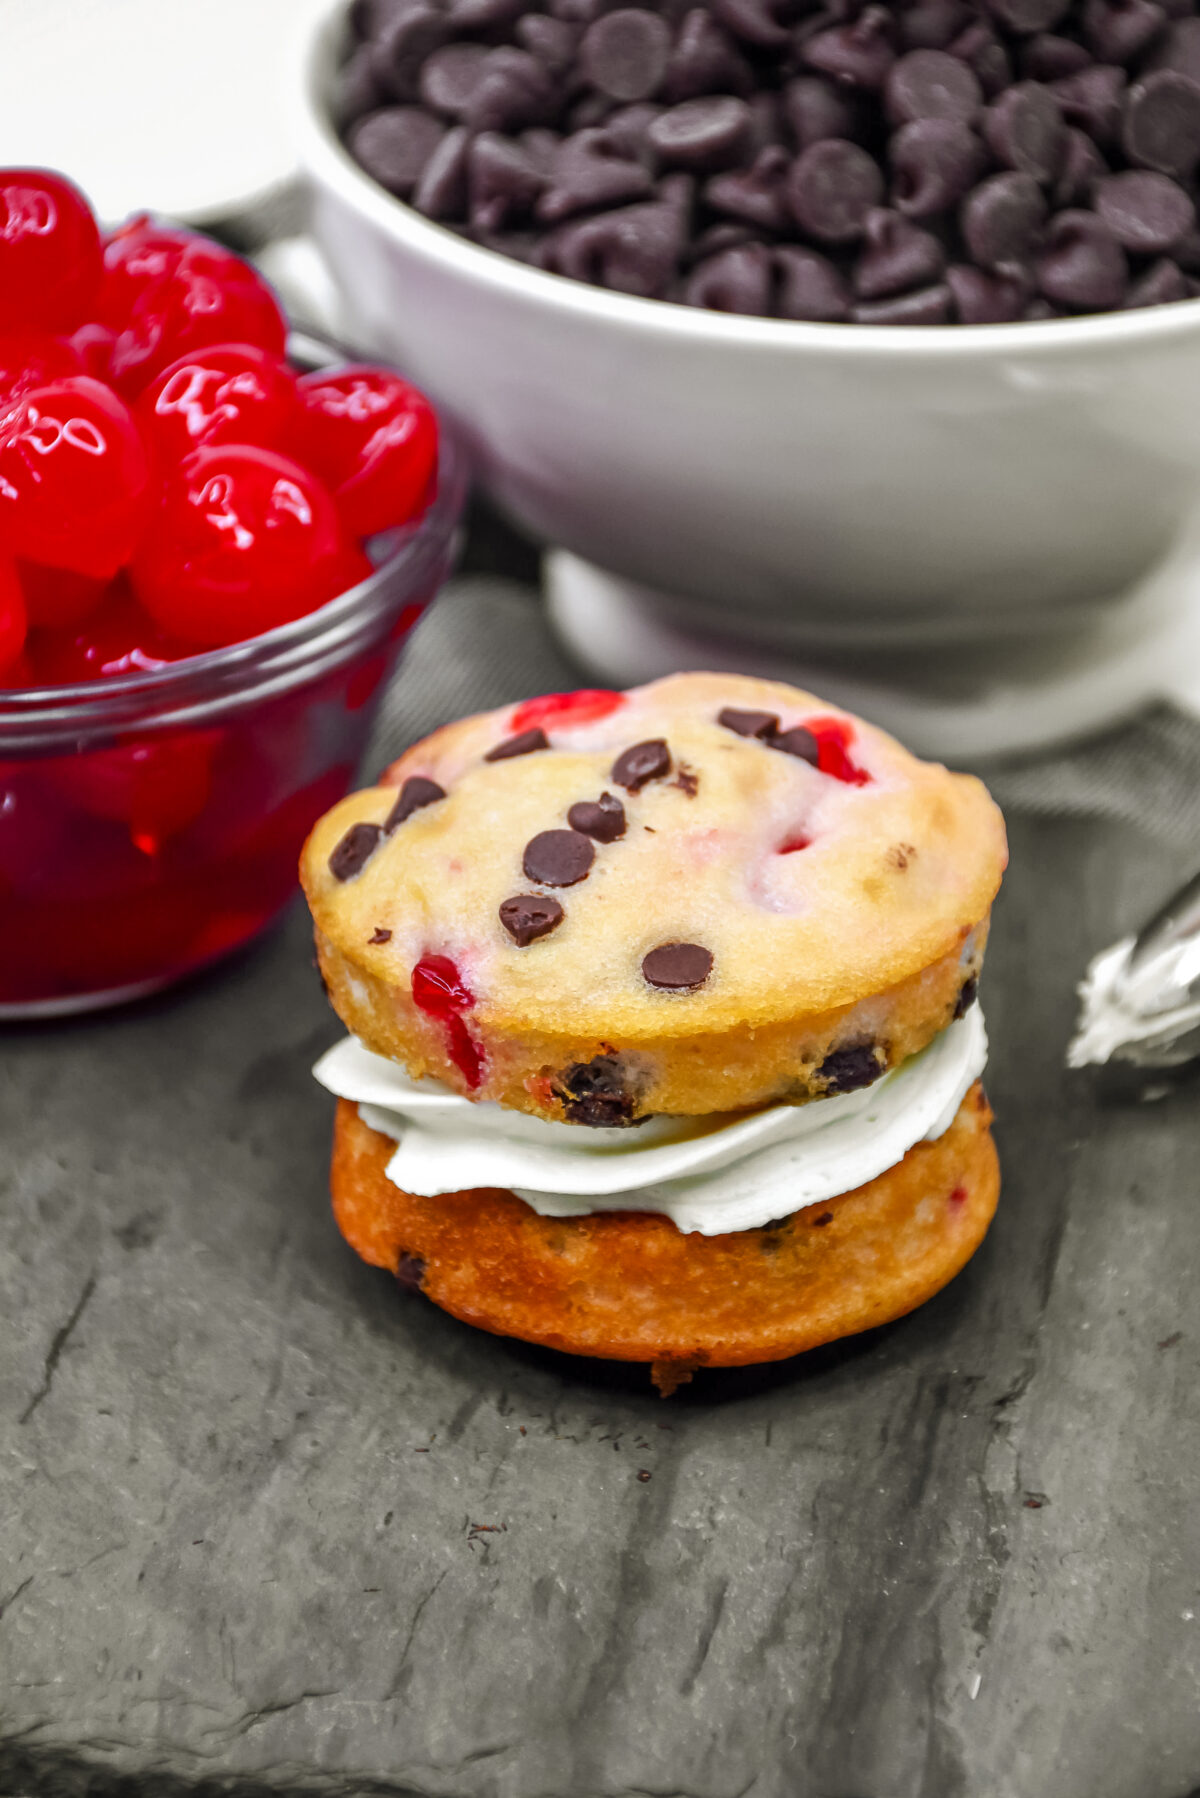 Fans of Ben & Jerry's will love this delicious cherry garcia whoopie pies recipe. They taste just like the classic ice cream treat!